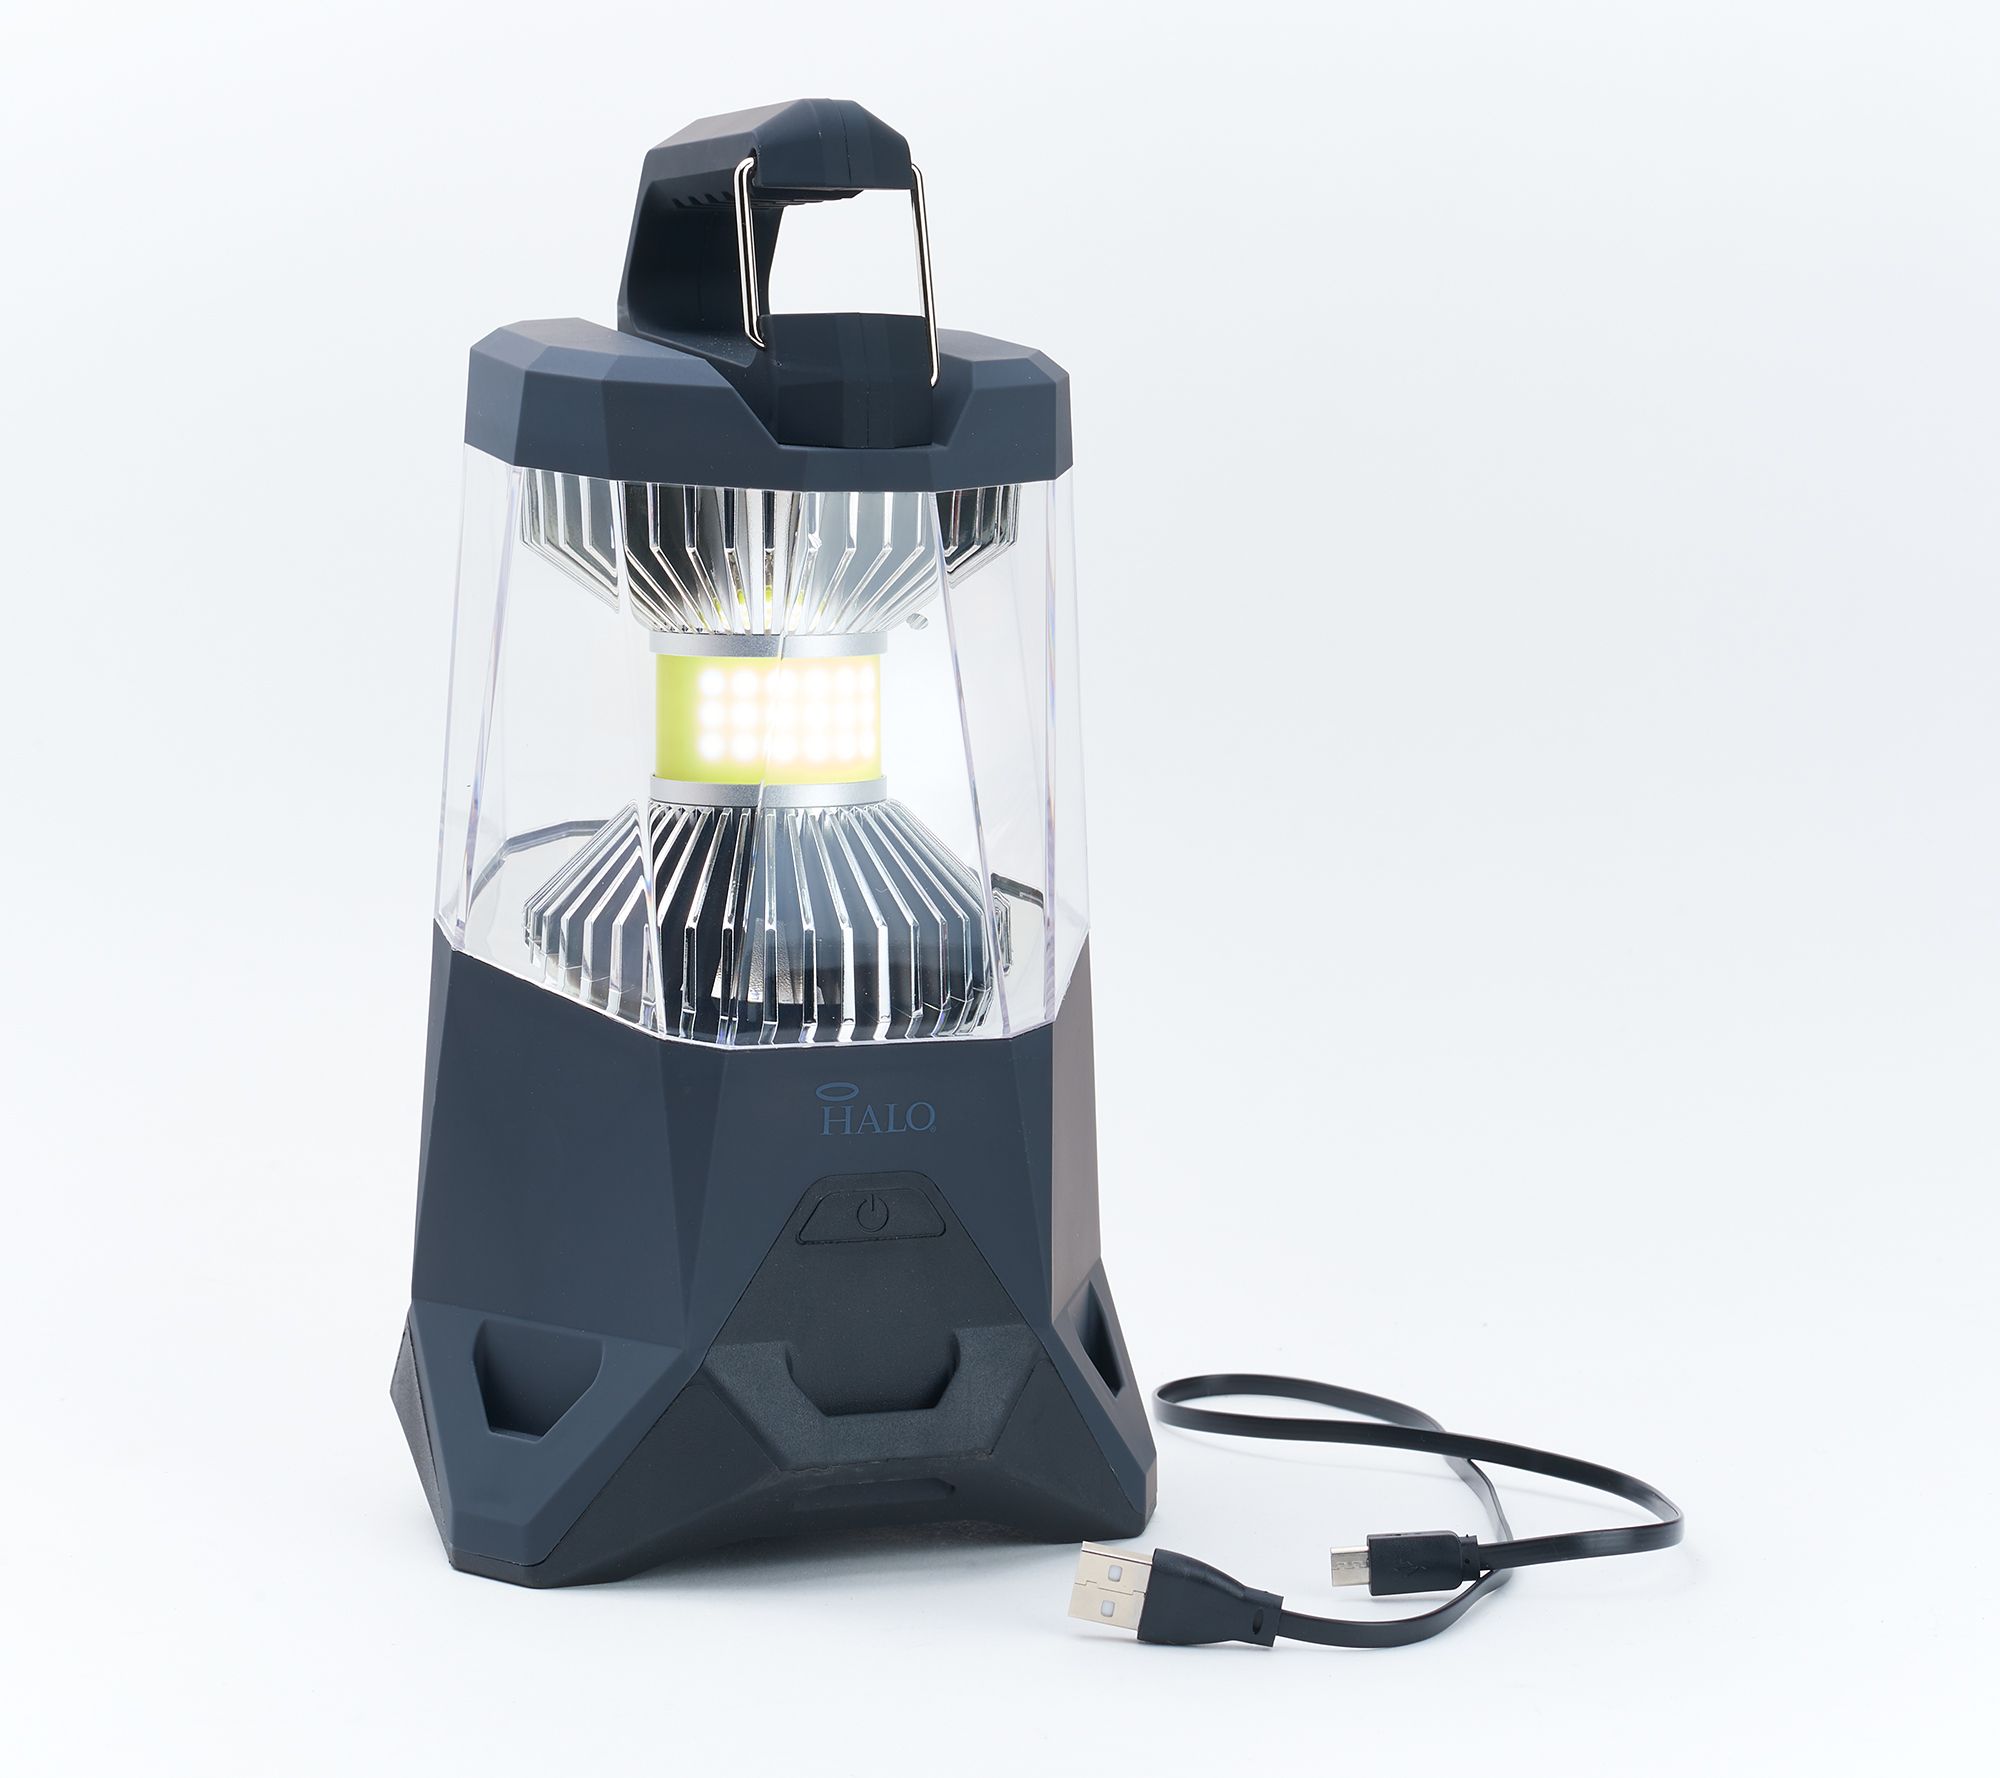 BrightEase Lantern with Removeable Flashlights